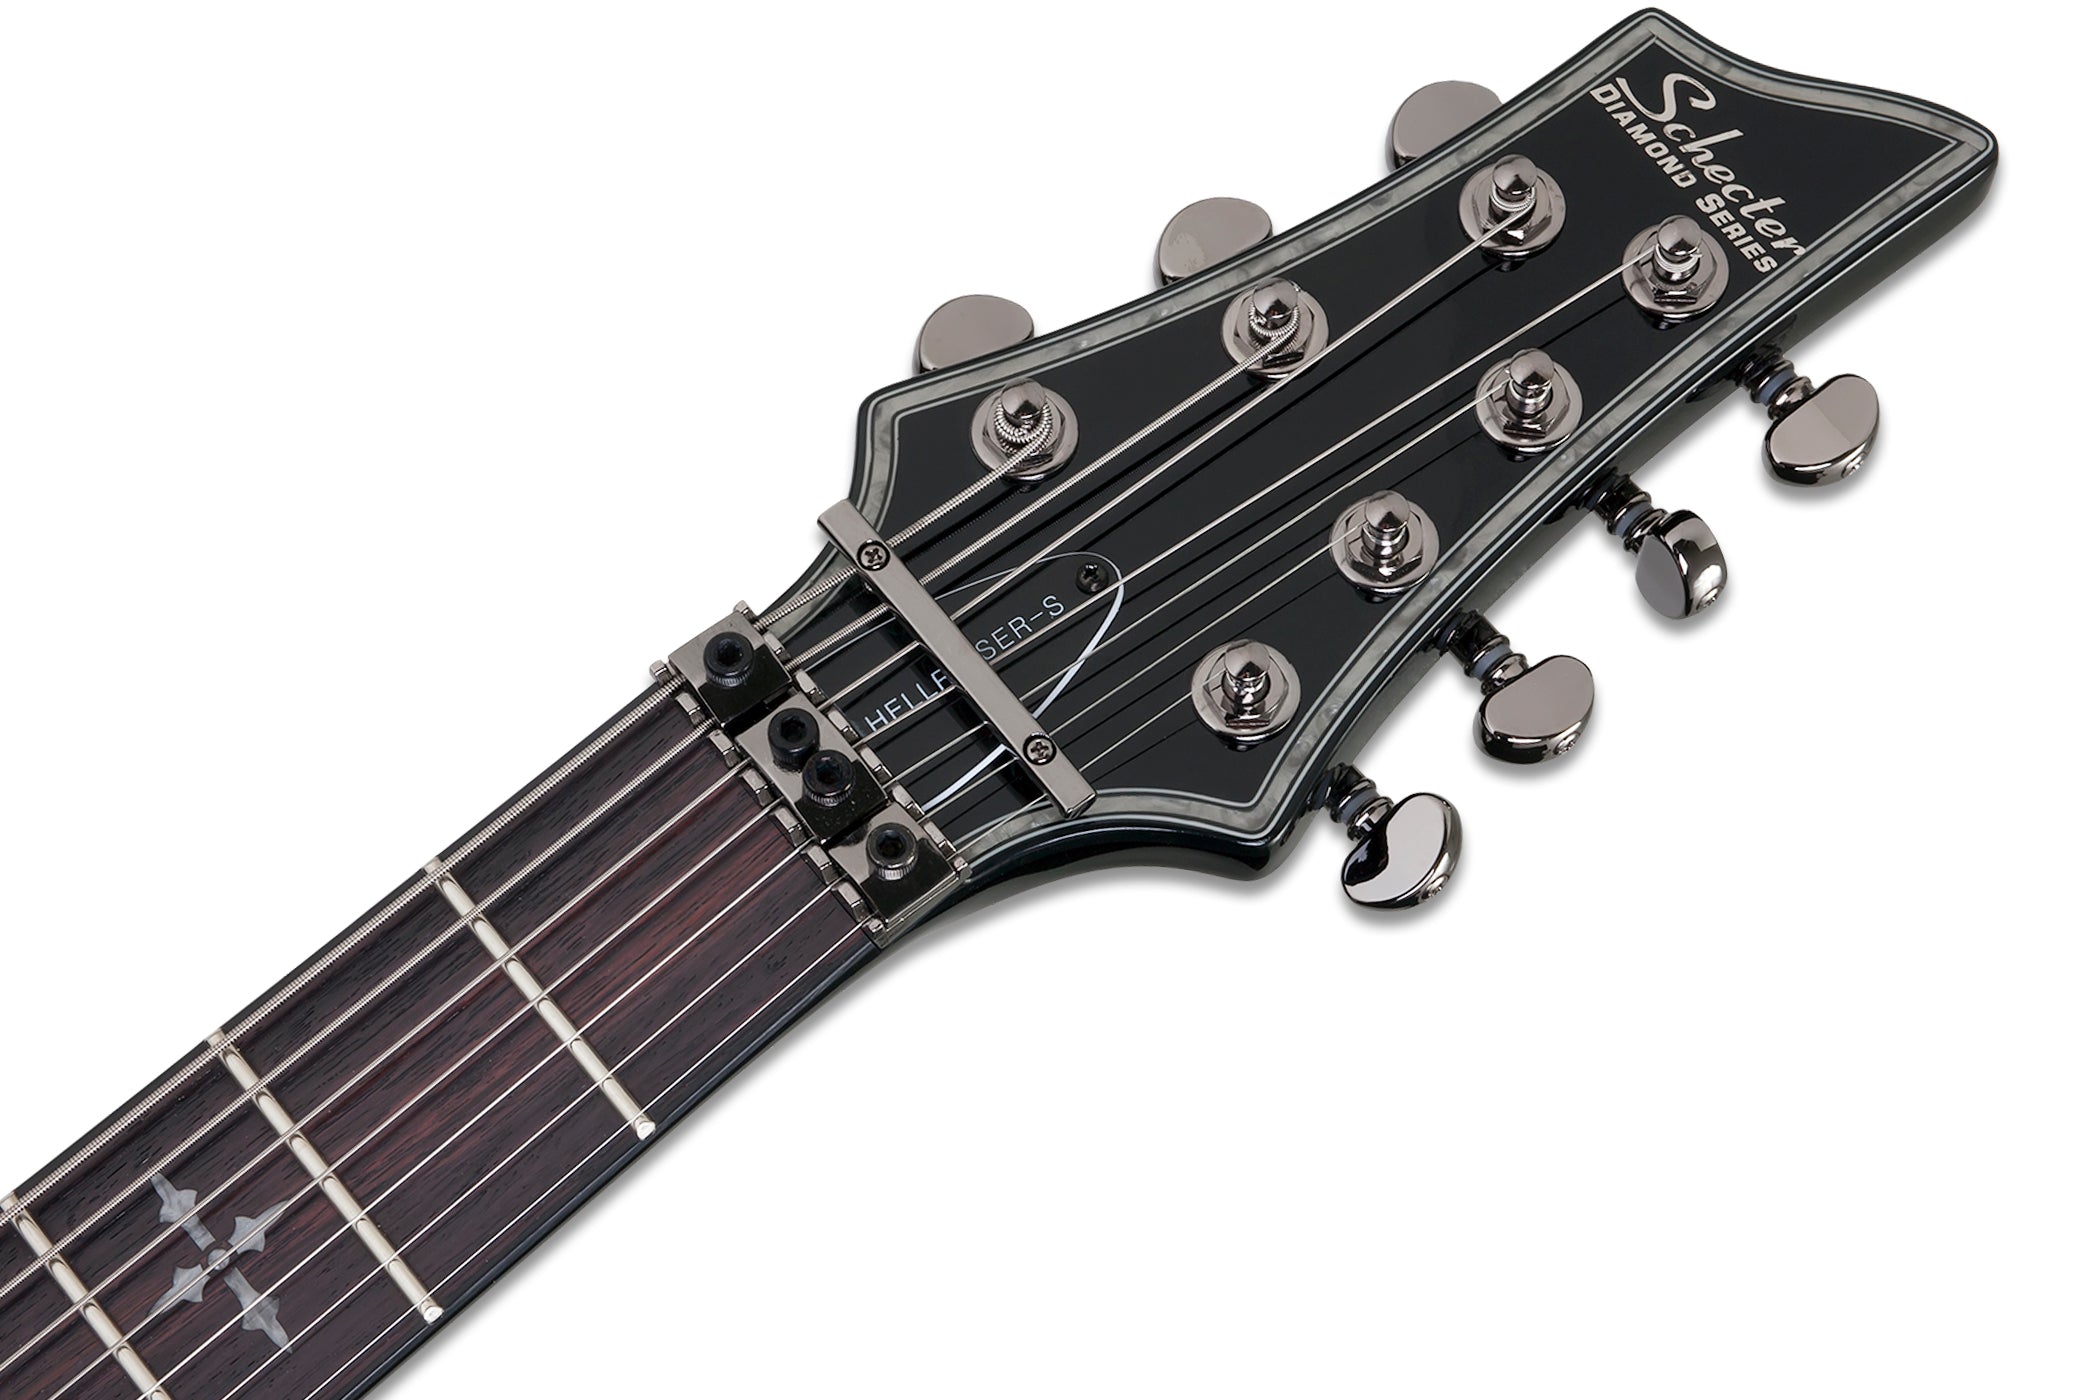 Schecter C 7 FR Hellraiser S BLK Gloss Black 7 String Guitar with FR and Sustainiac and EMG 81 1830-SHC